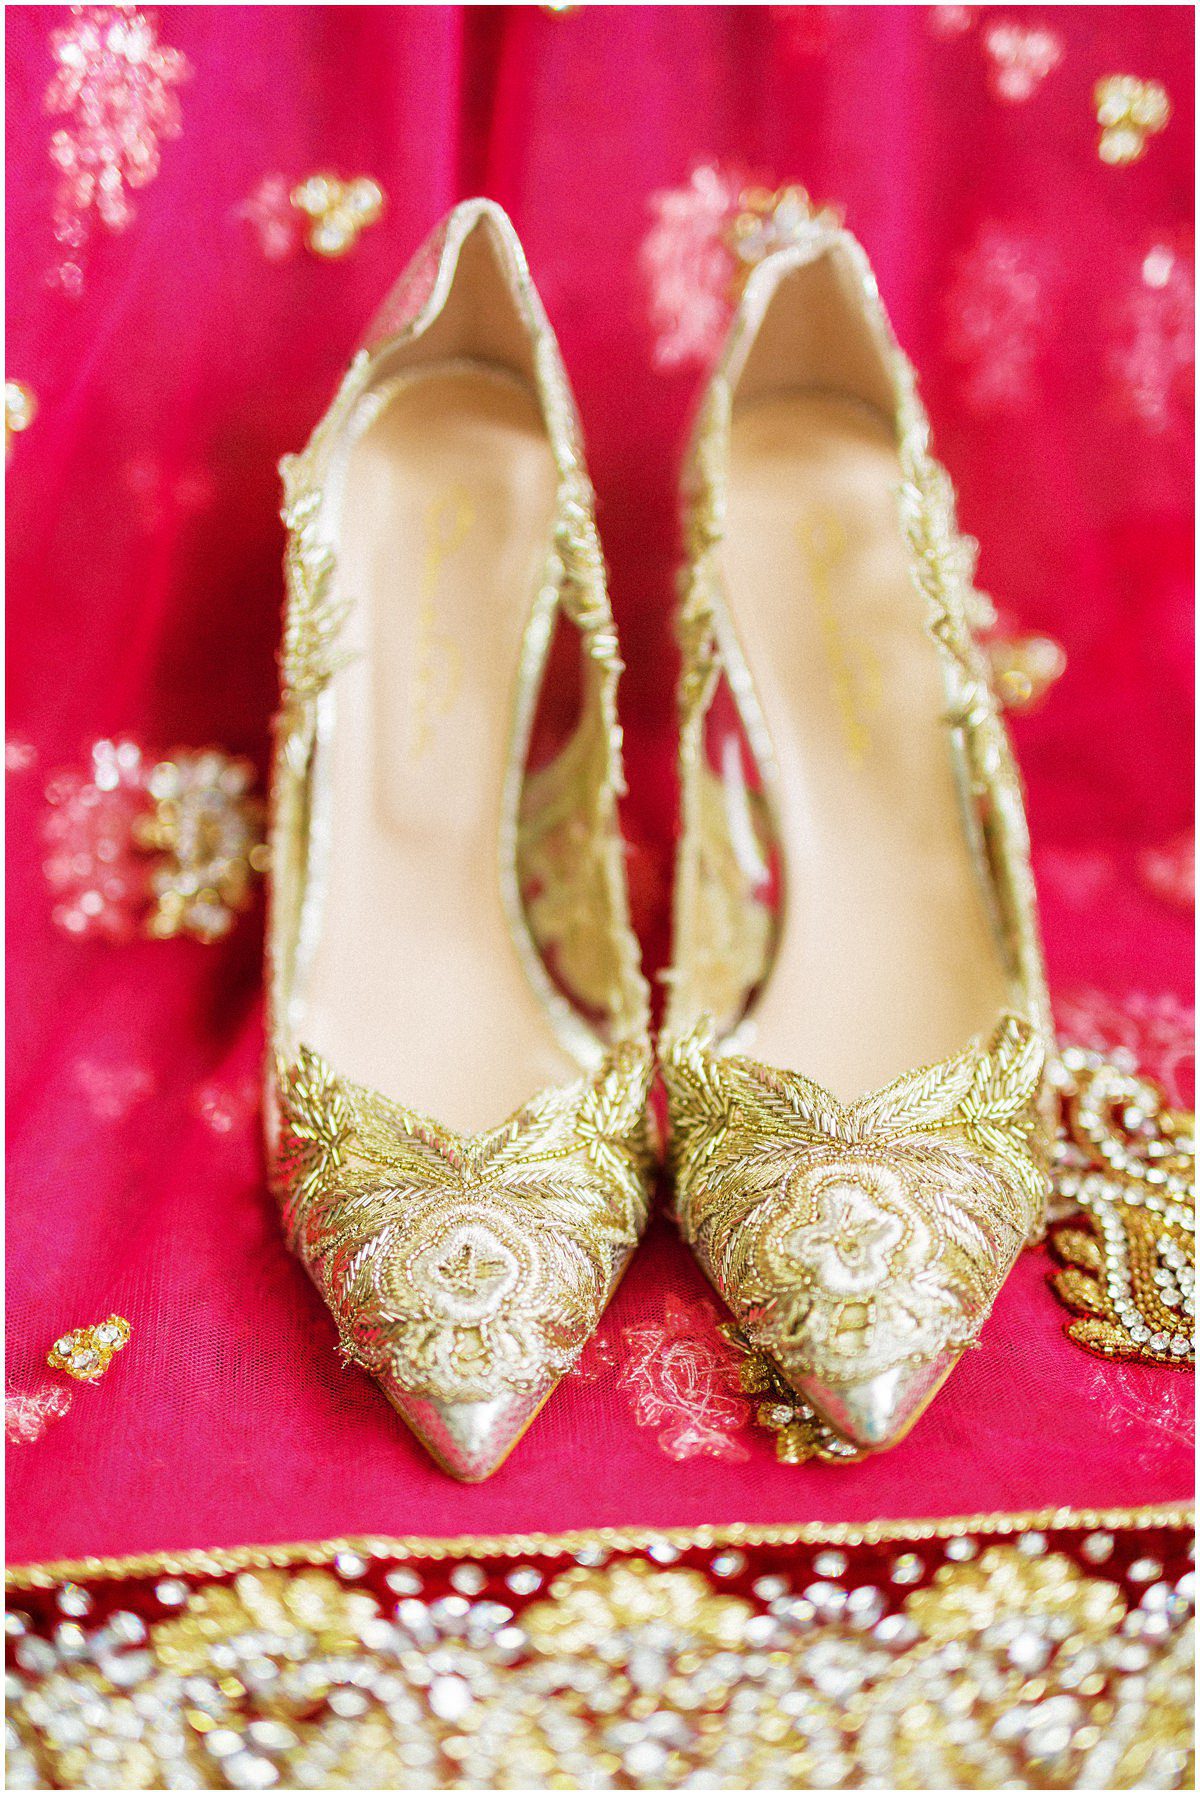 bridal details photo you wont want missed on your wedding day